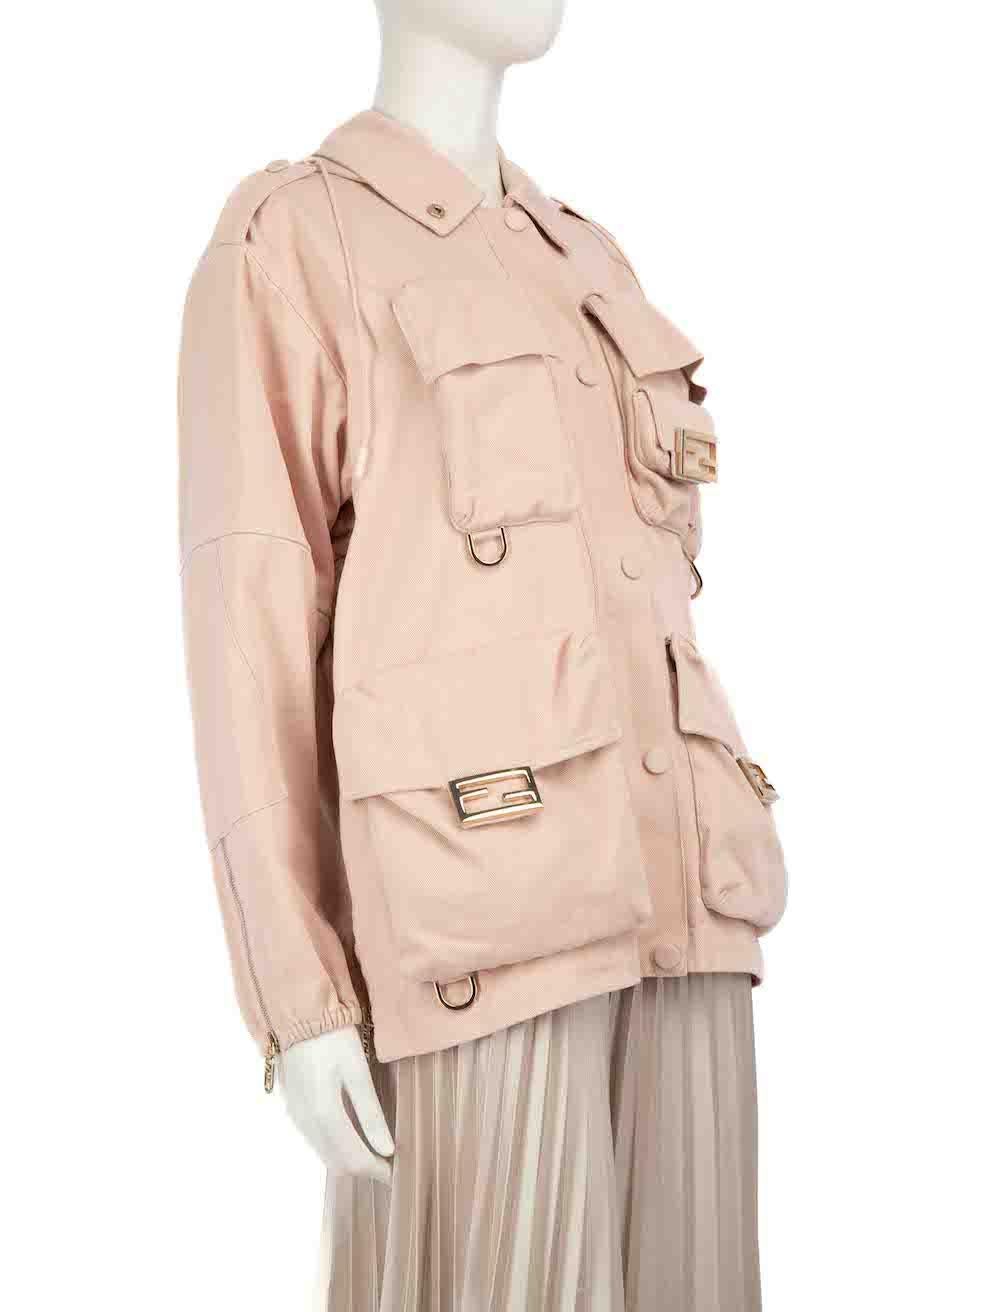 CONDITION is New with tags on this brand new Fendi designer item. This item comes with original packaging.
 
 
 
 Details
 
 
 Model: FJ7323AM34 F1J7A
 
 Season: FW23
 
 Pink
 
 Cotton drill
 
 Jacket
 
 Hooded
 
 Zip and snap button fastening
 
